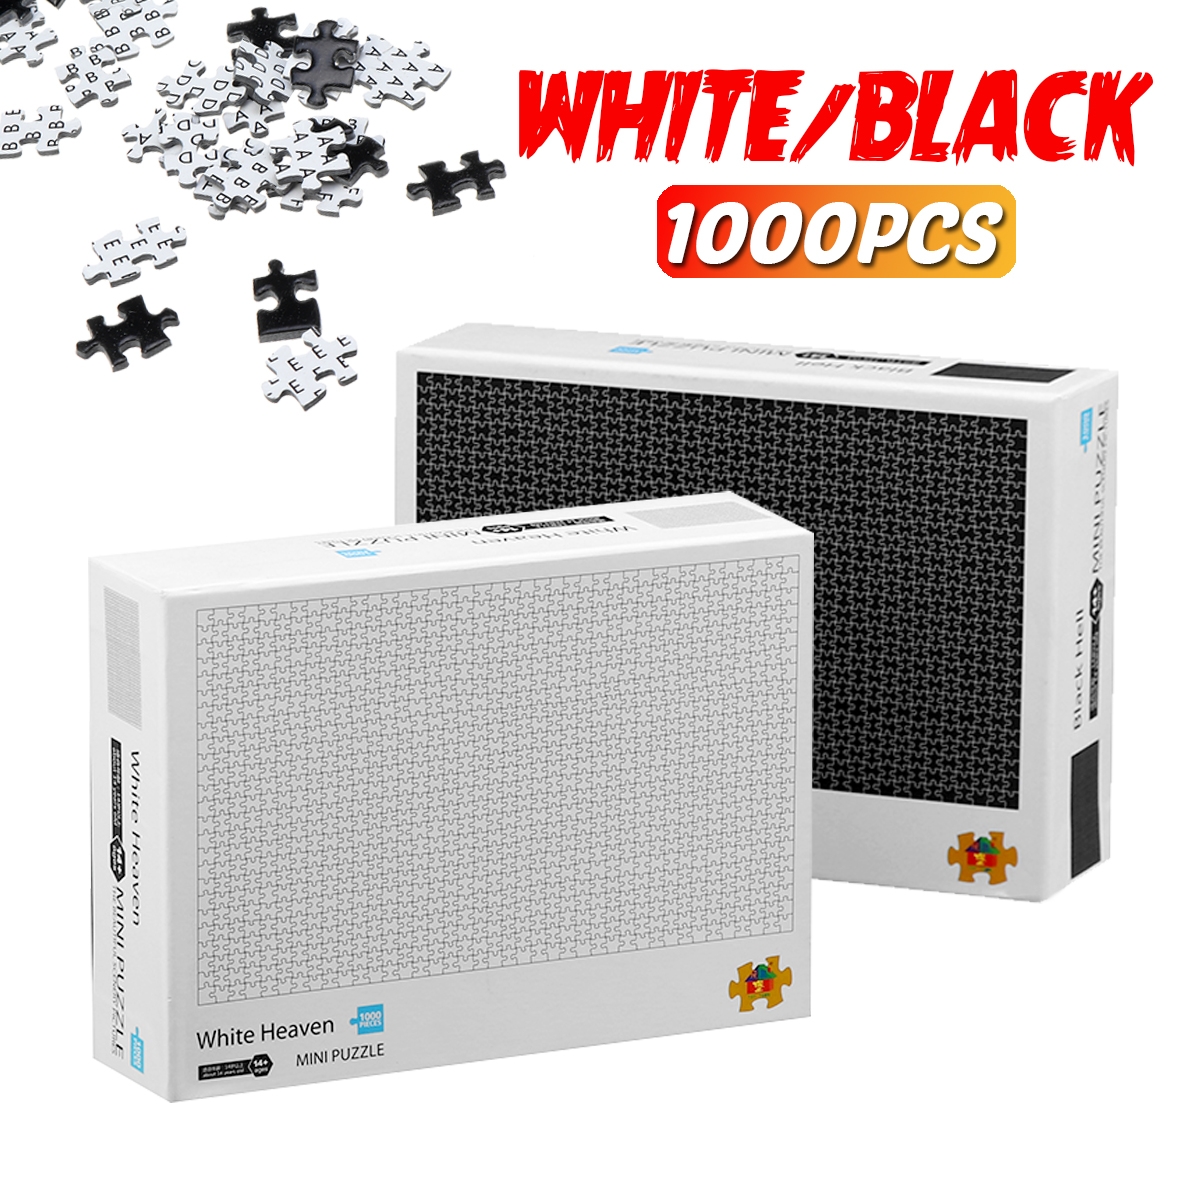 1000Pcs Pure Color White Black Paper Jigsaw Puzzle Toy DIY Assembly Educational Game Toy